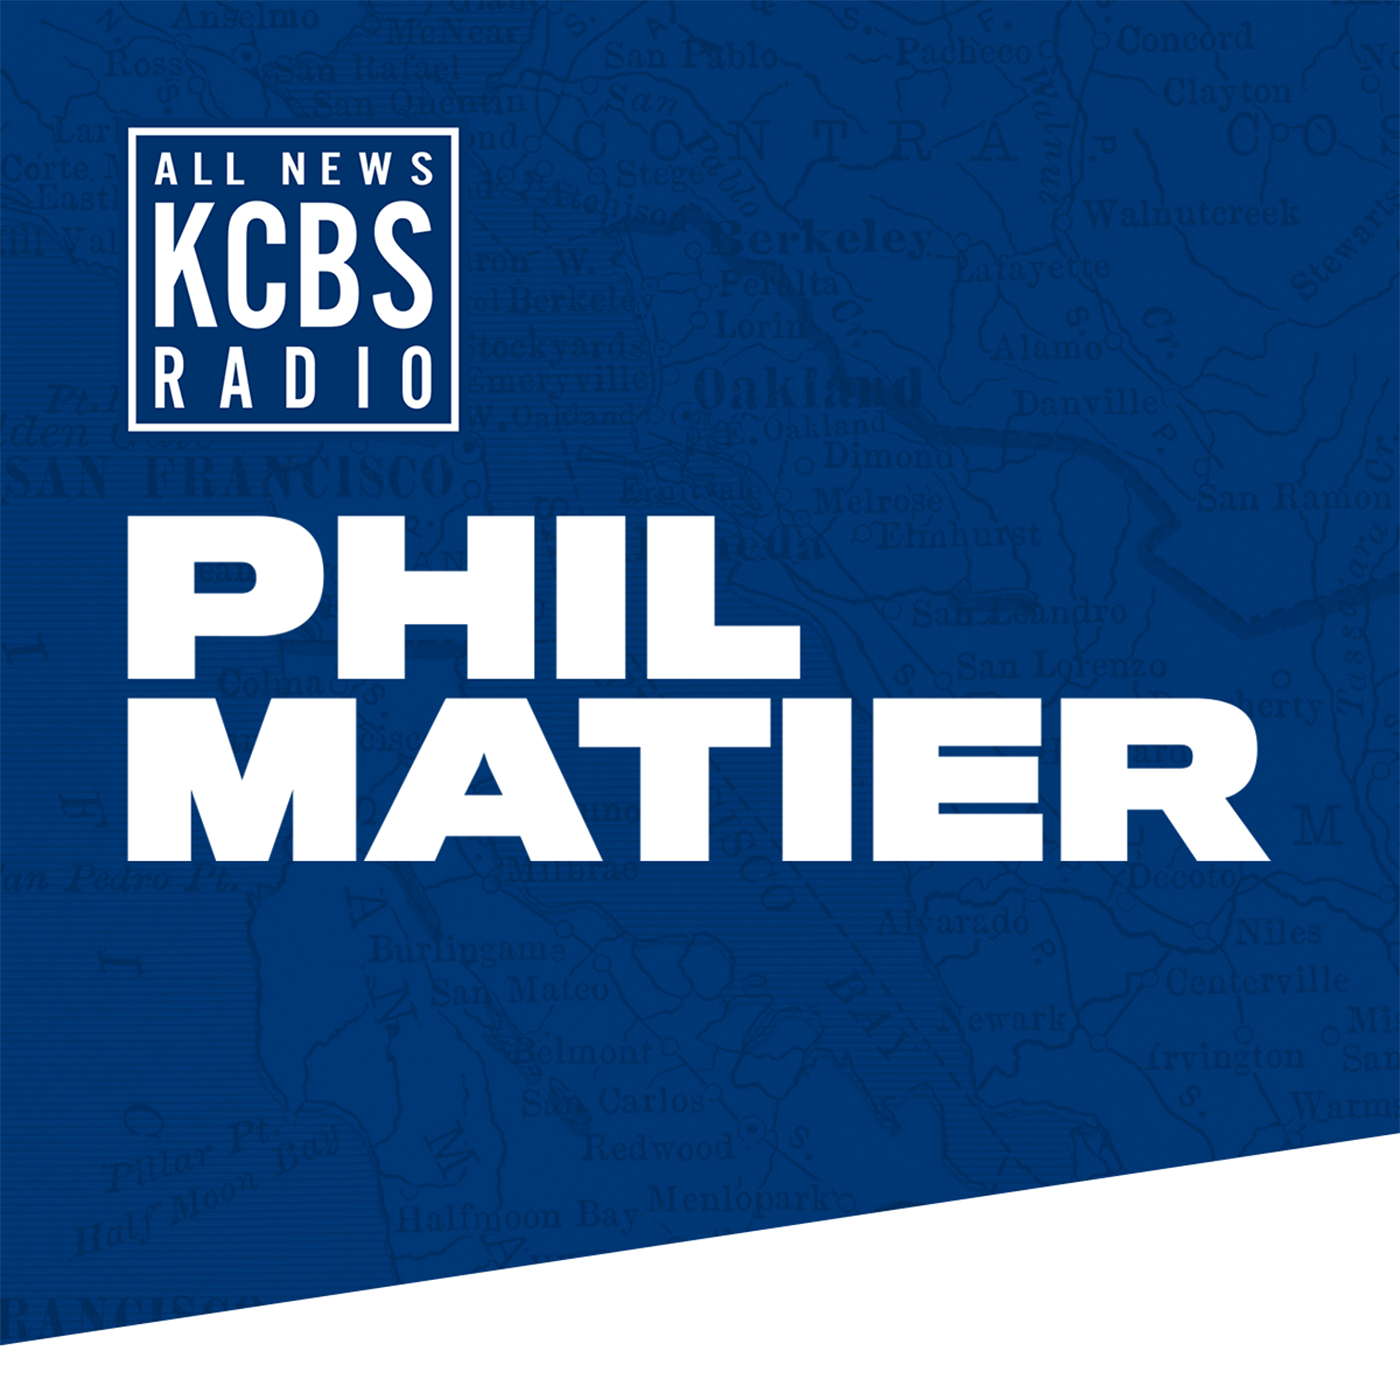 Phil Matier: Early Voters Might Wish for a Do-Over